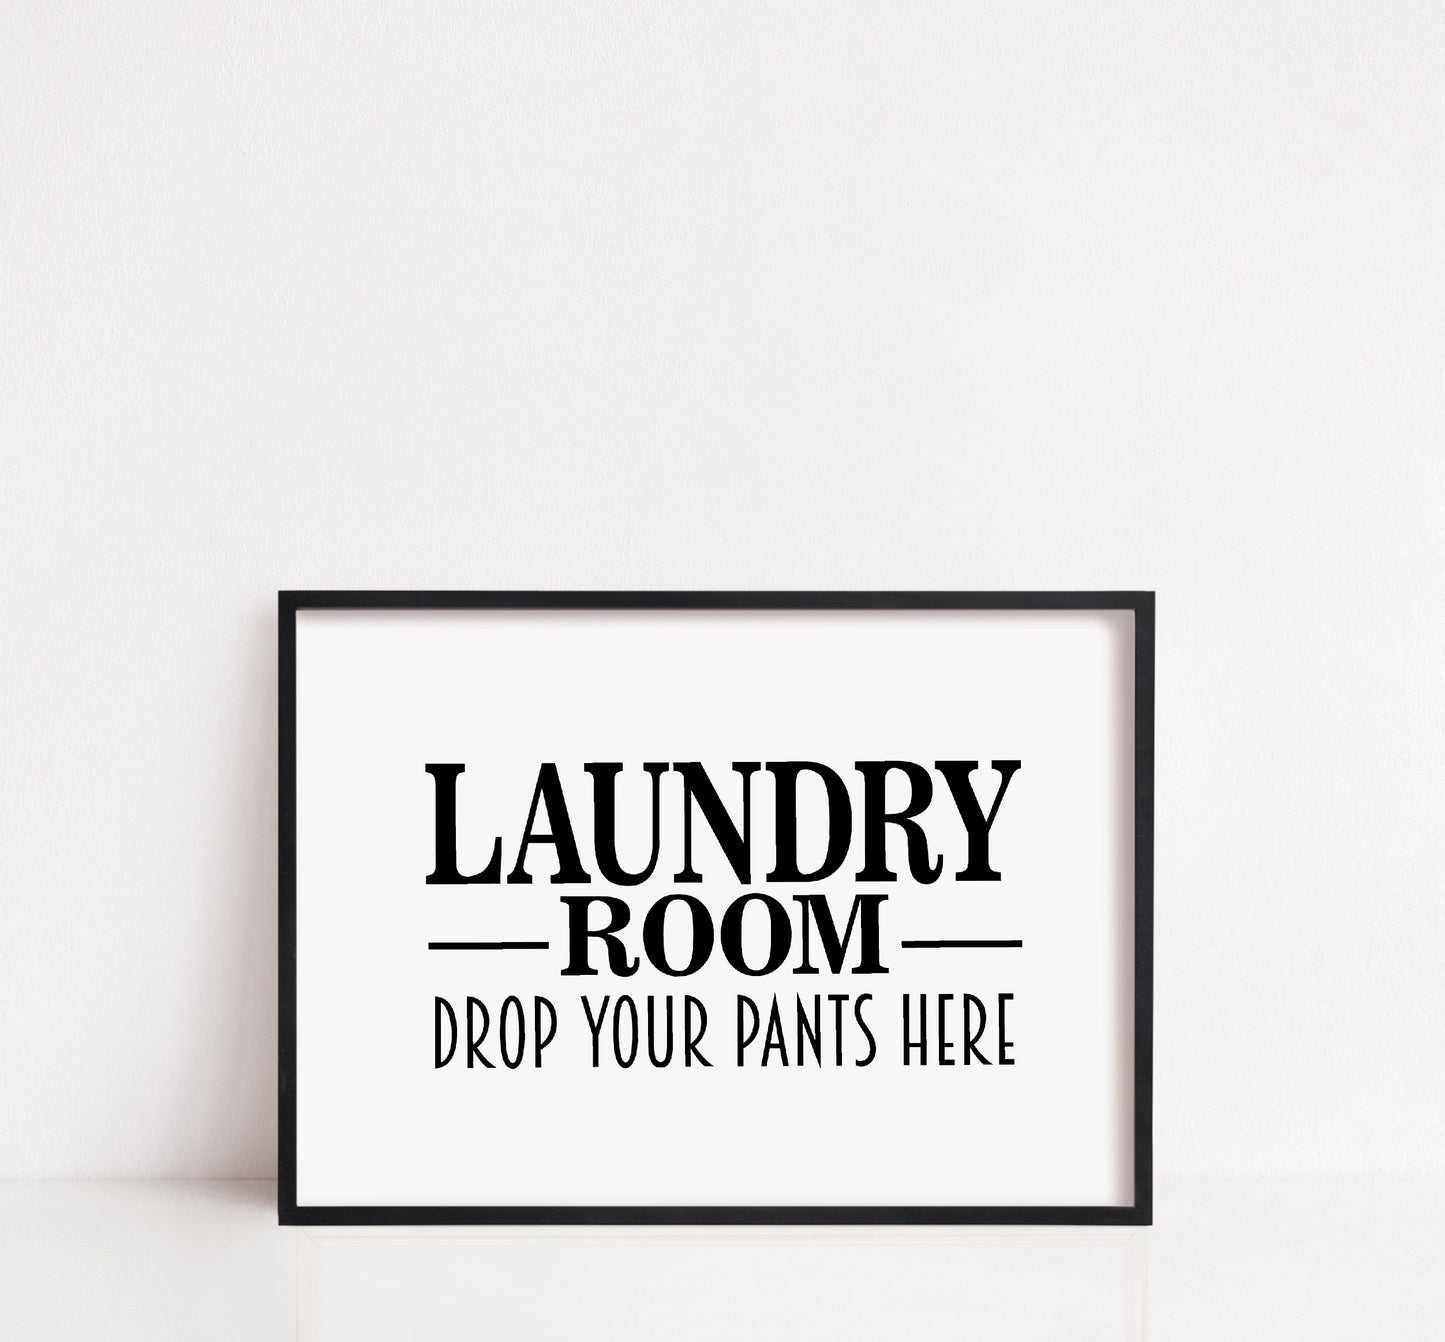 Laundry Print | Laundry Room - Drop Your Pants Here | Funny Print